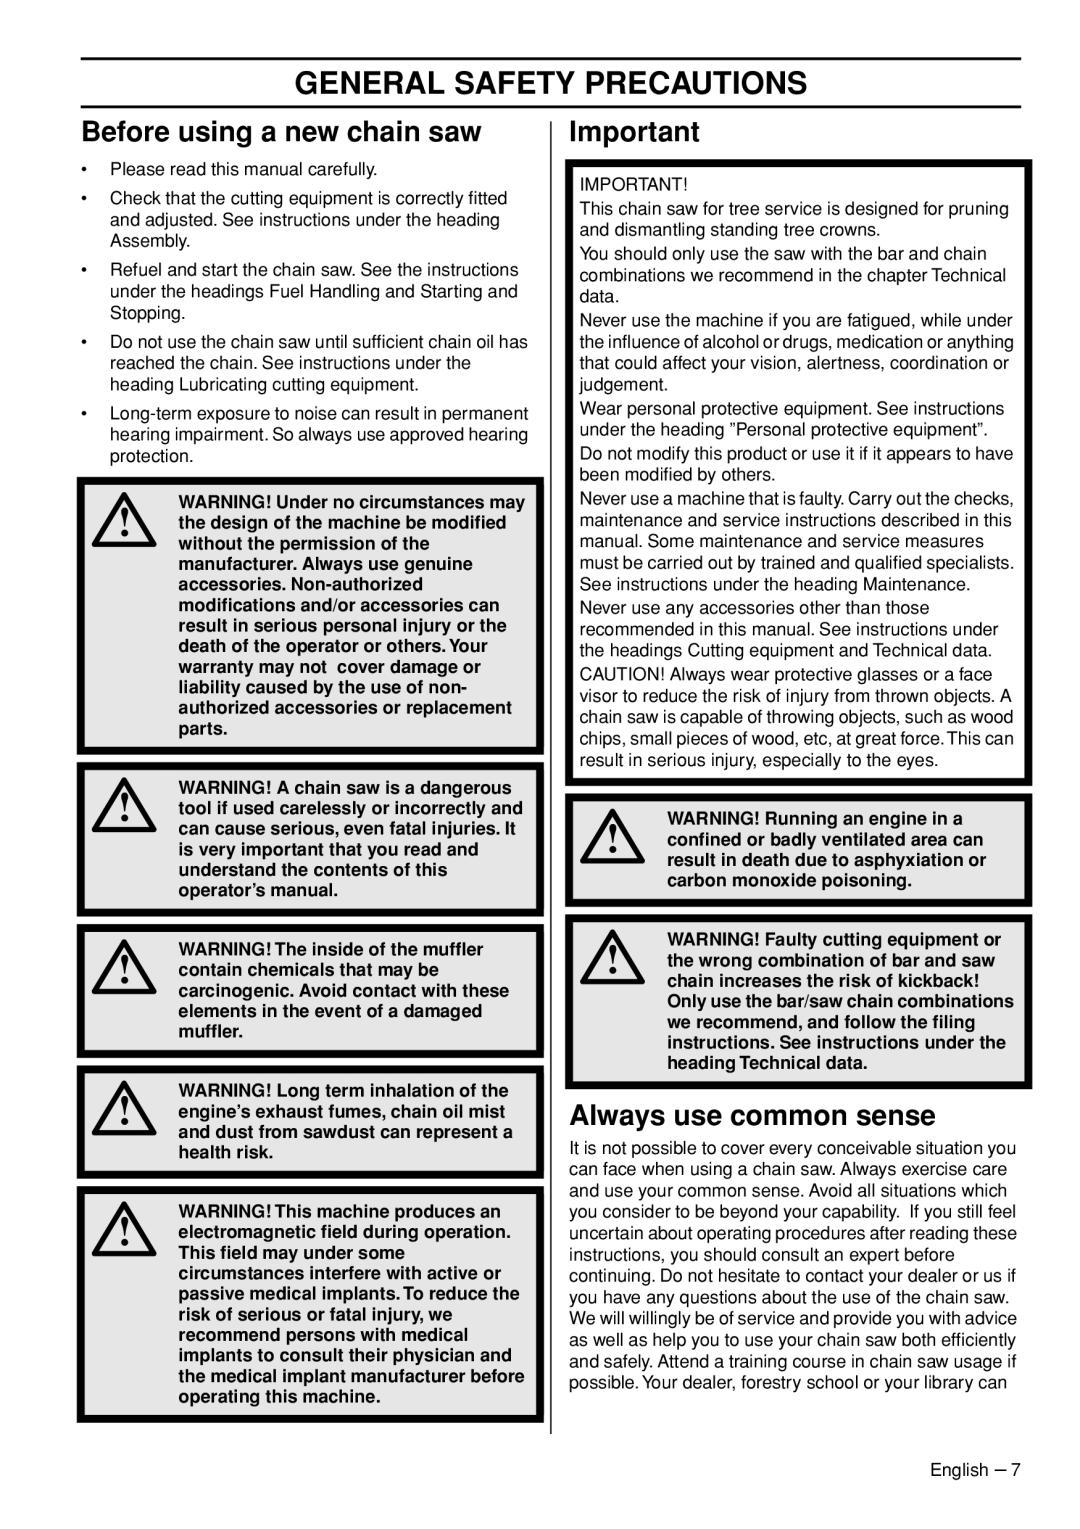 Husqvarna 1153158-95 manual General Safety Precautions, Before using a new chain saw, Always use common sense 